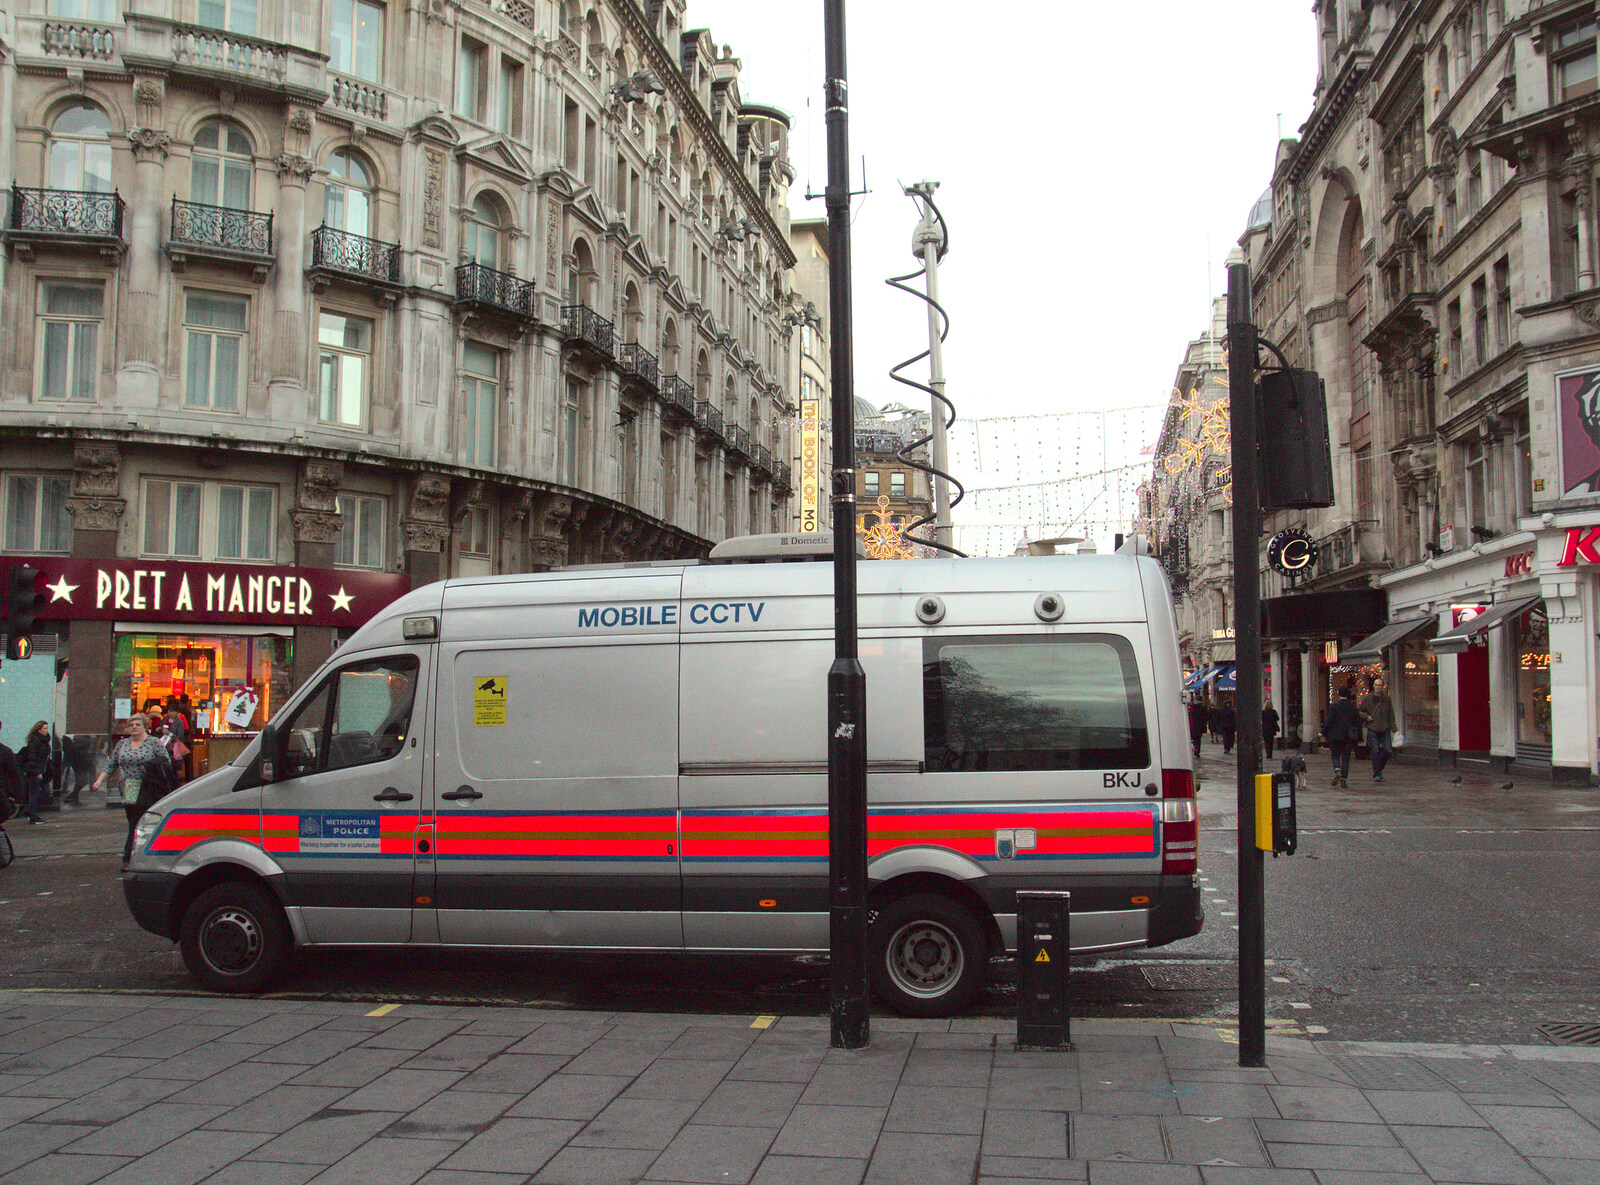 The mobile CCTV van spies on the masses from SwiftKey Innovation Nights, Westminster, London - 19th December 2014